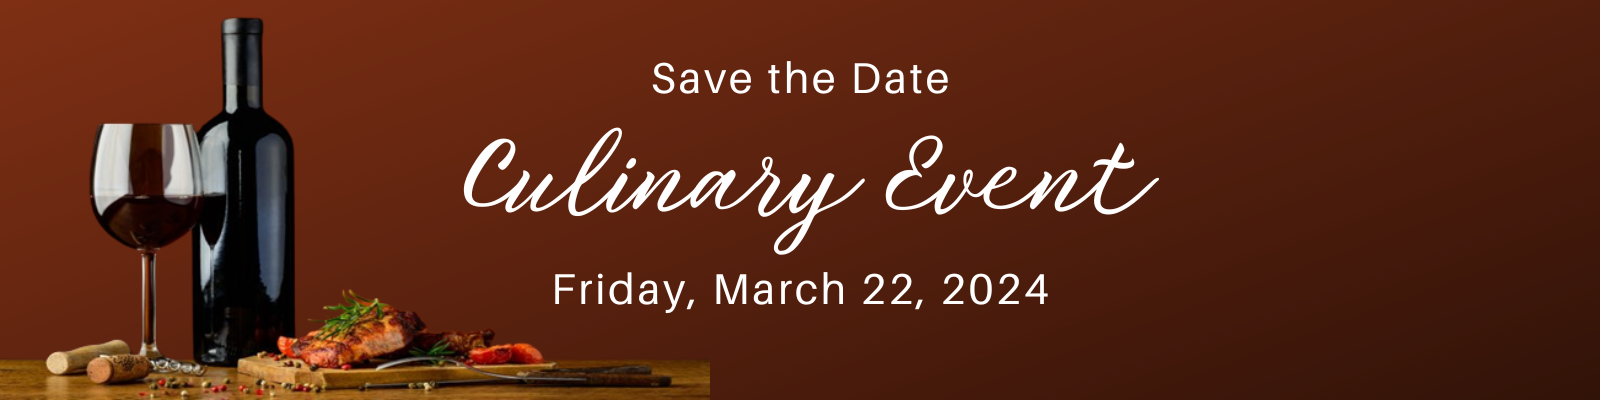 Culinary Event - March 22, 2024 6:30-10:30 PM